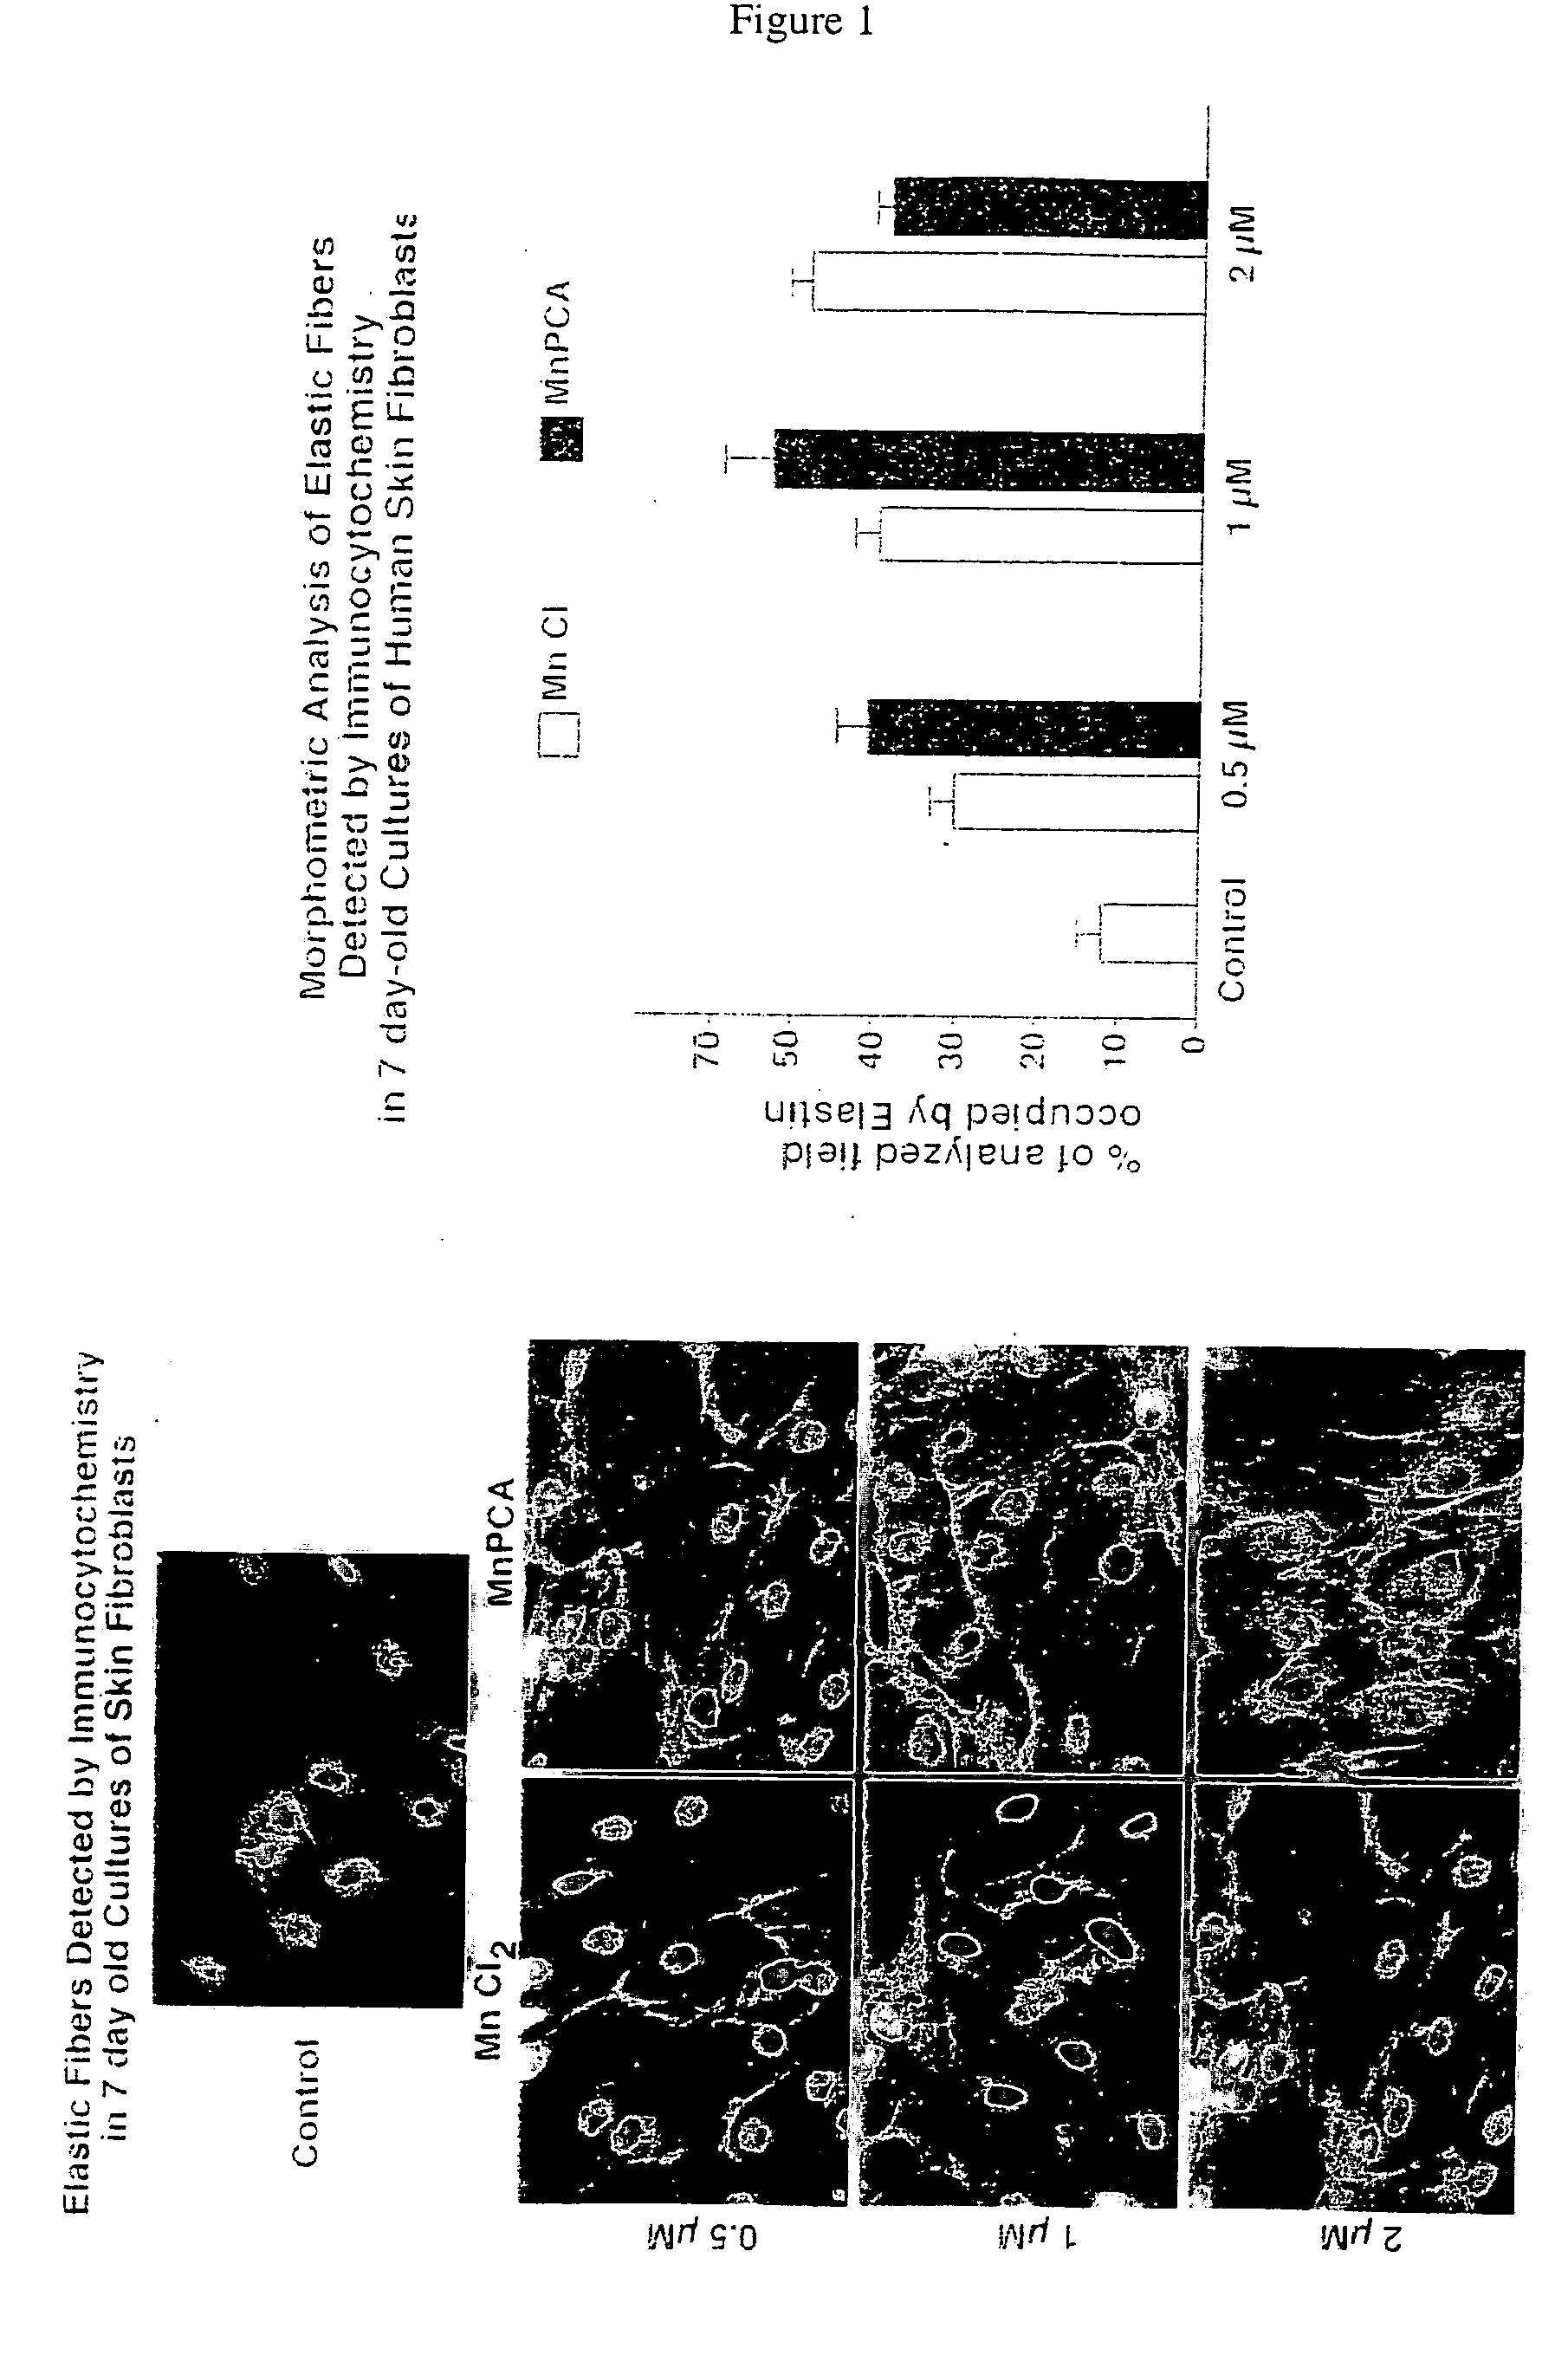 Compositions for elastrogenesis and connective tissue treatment